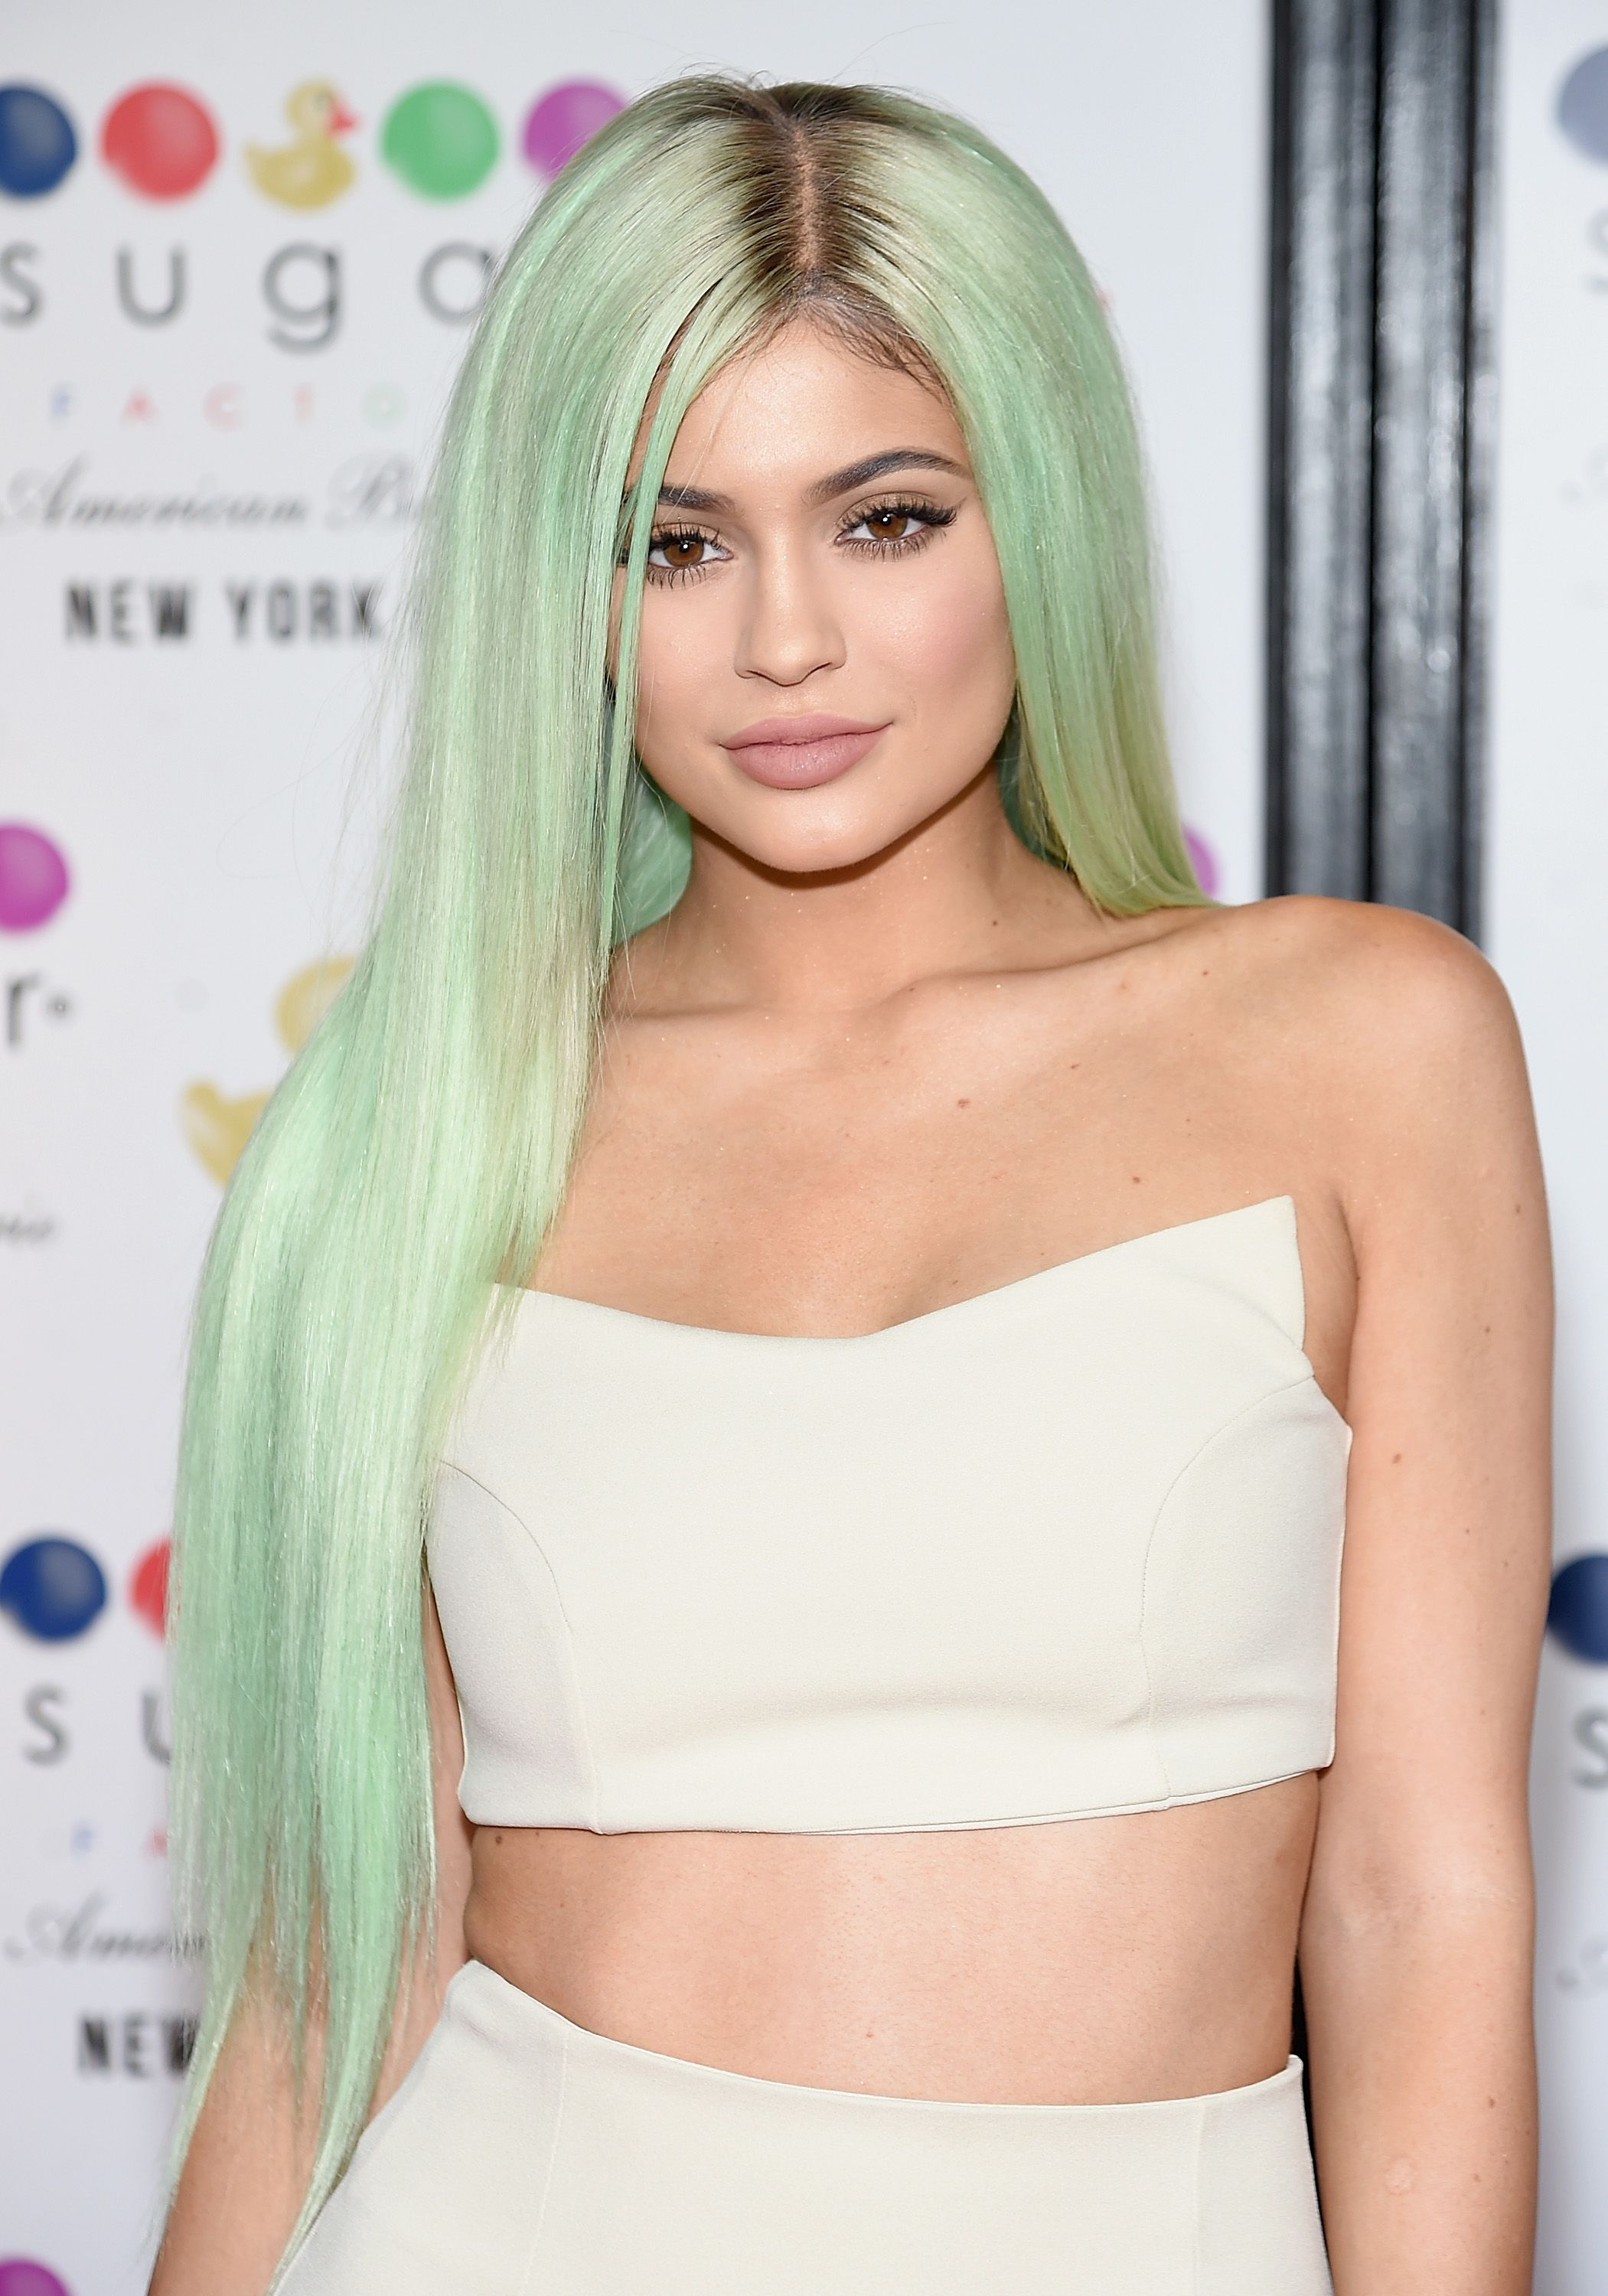 Reality star Kylie Jenner attending the opening of the Sugar Factory American Brasserie on September 16, 2015 in New York  | Photo: Getty Images